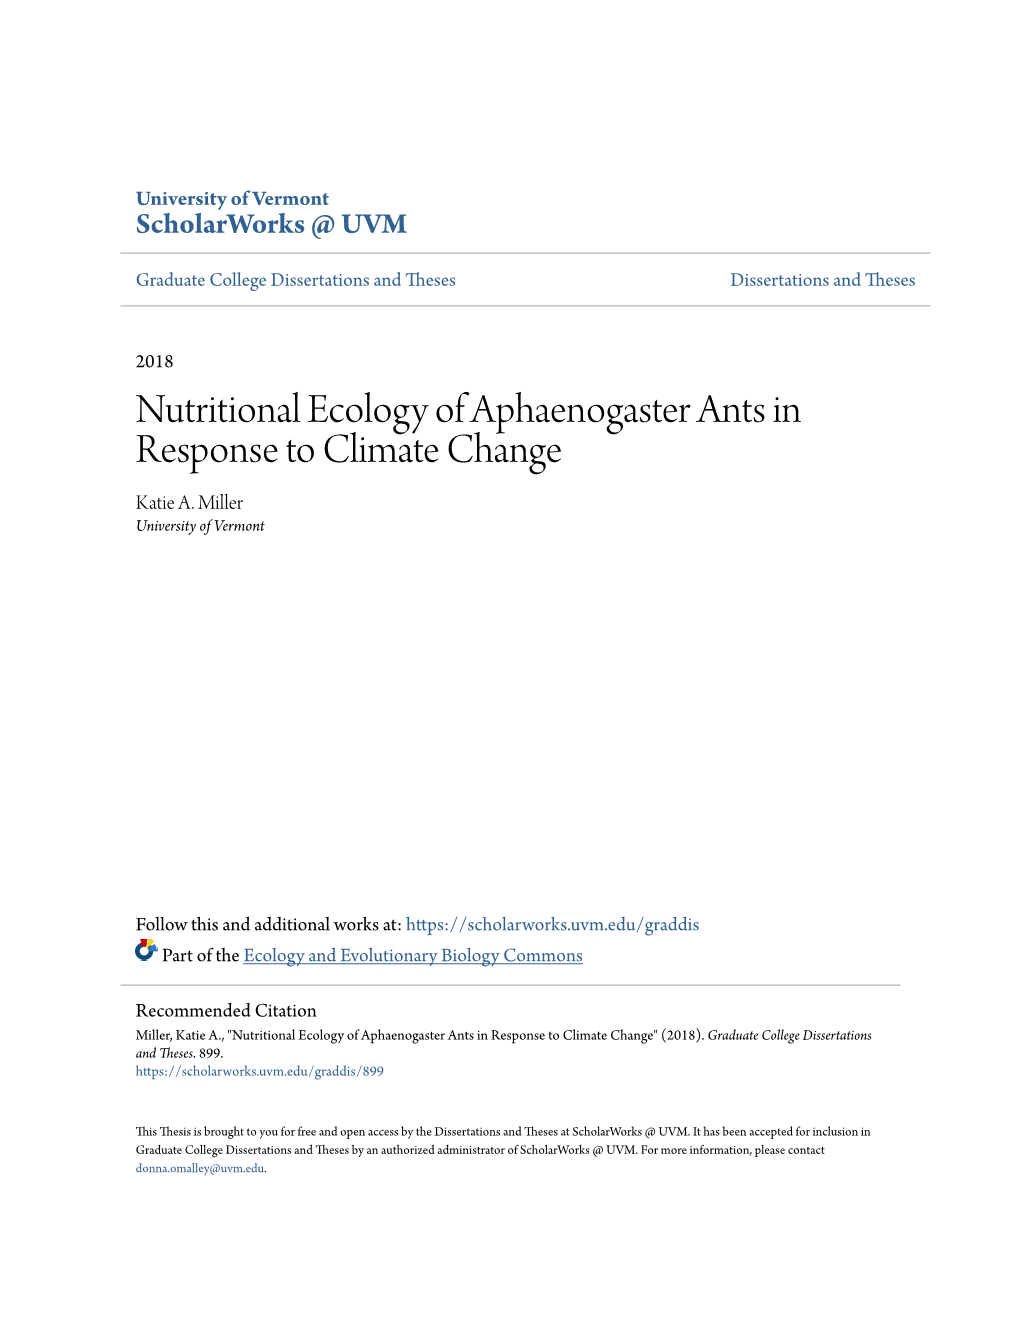 Nutritional Ecology of Aphaenogaster Ants in Response to Climate Change Katie A